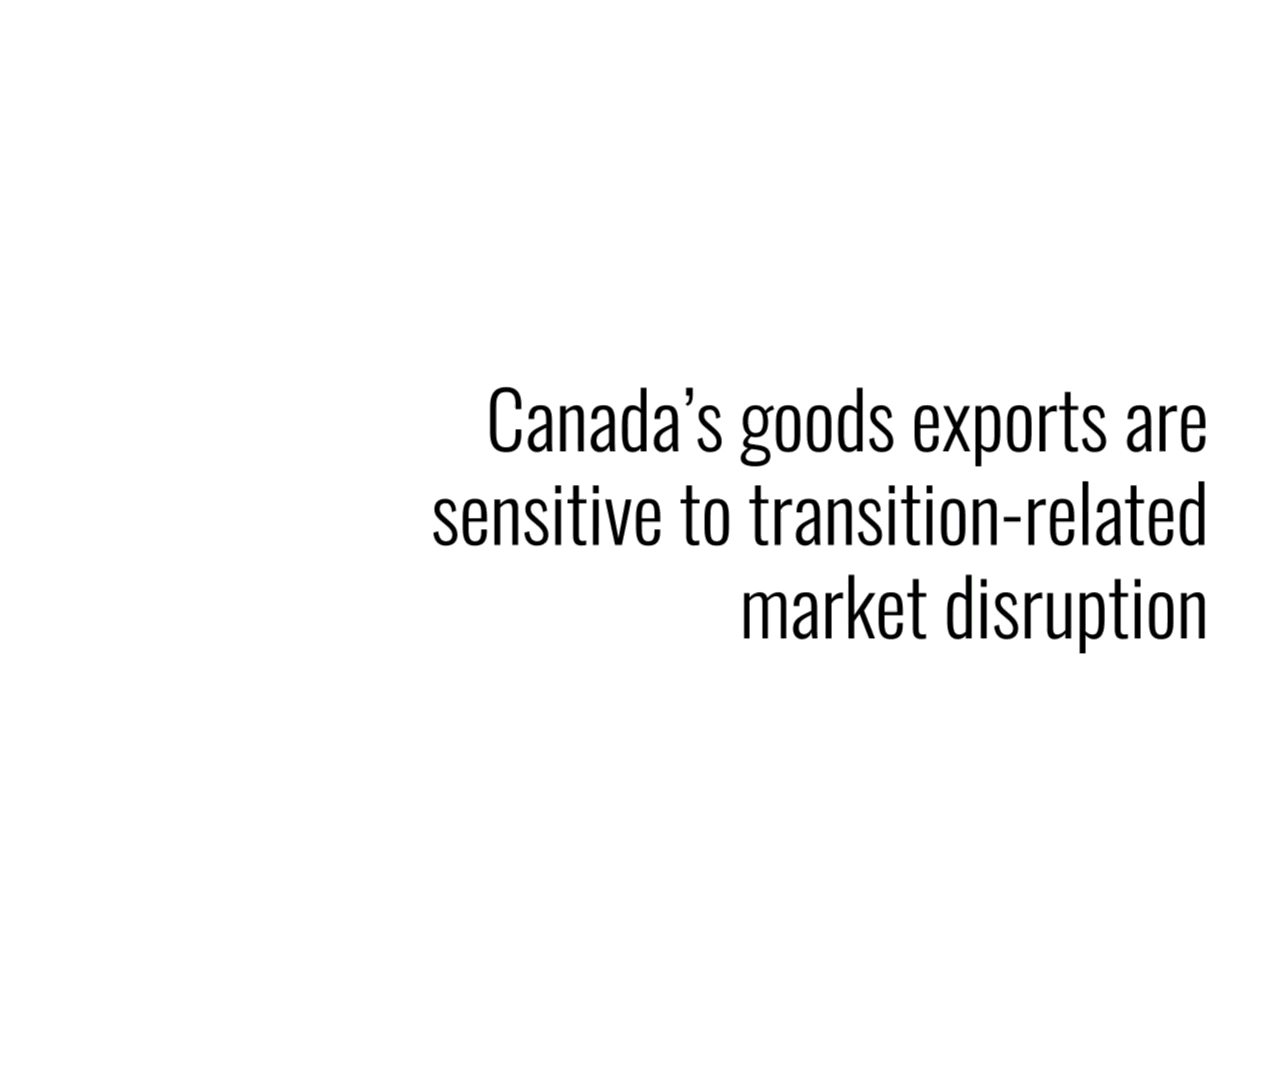 Source: GAC (2020). Notes: This figure shows the per cent share of the value of Canada’s goods exports in 2019, by product. Nearly 70% of Canada’s goods exports—including energy products, motor vehicles and parts, metal ores and non-metallic minerals, and basic and industrial chemicals—are in global markets expected to face disruption.